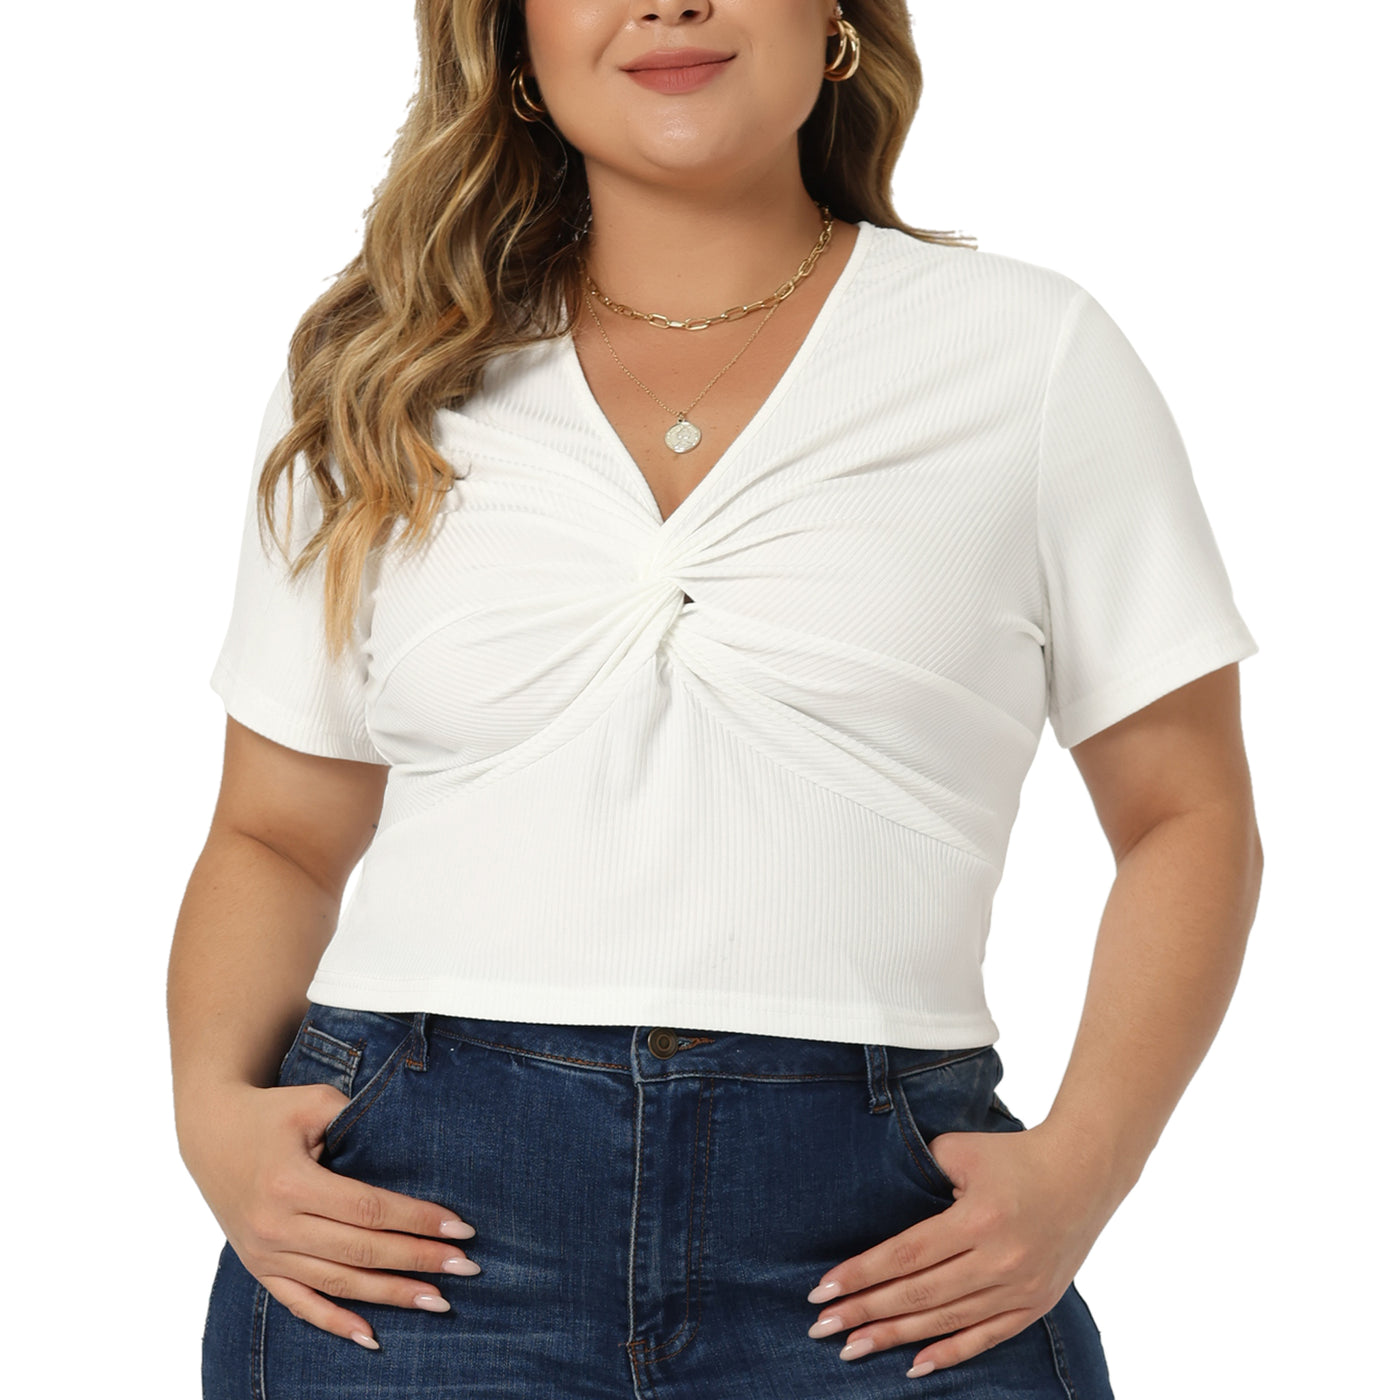 Bublédon Plus Size Blouse for Women Twist Front V Neck Ribbed Short Sleeve Casual Solid Tops